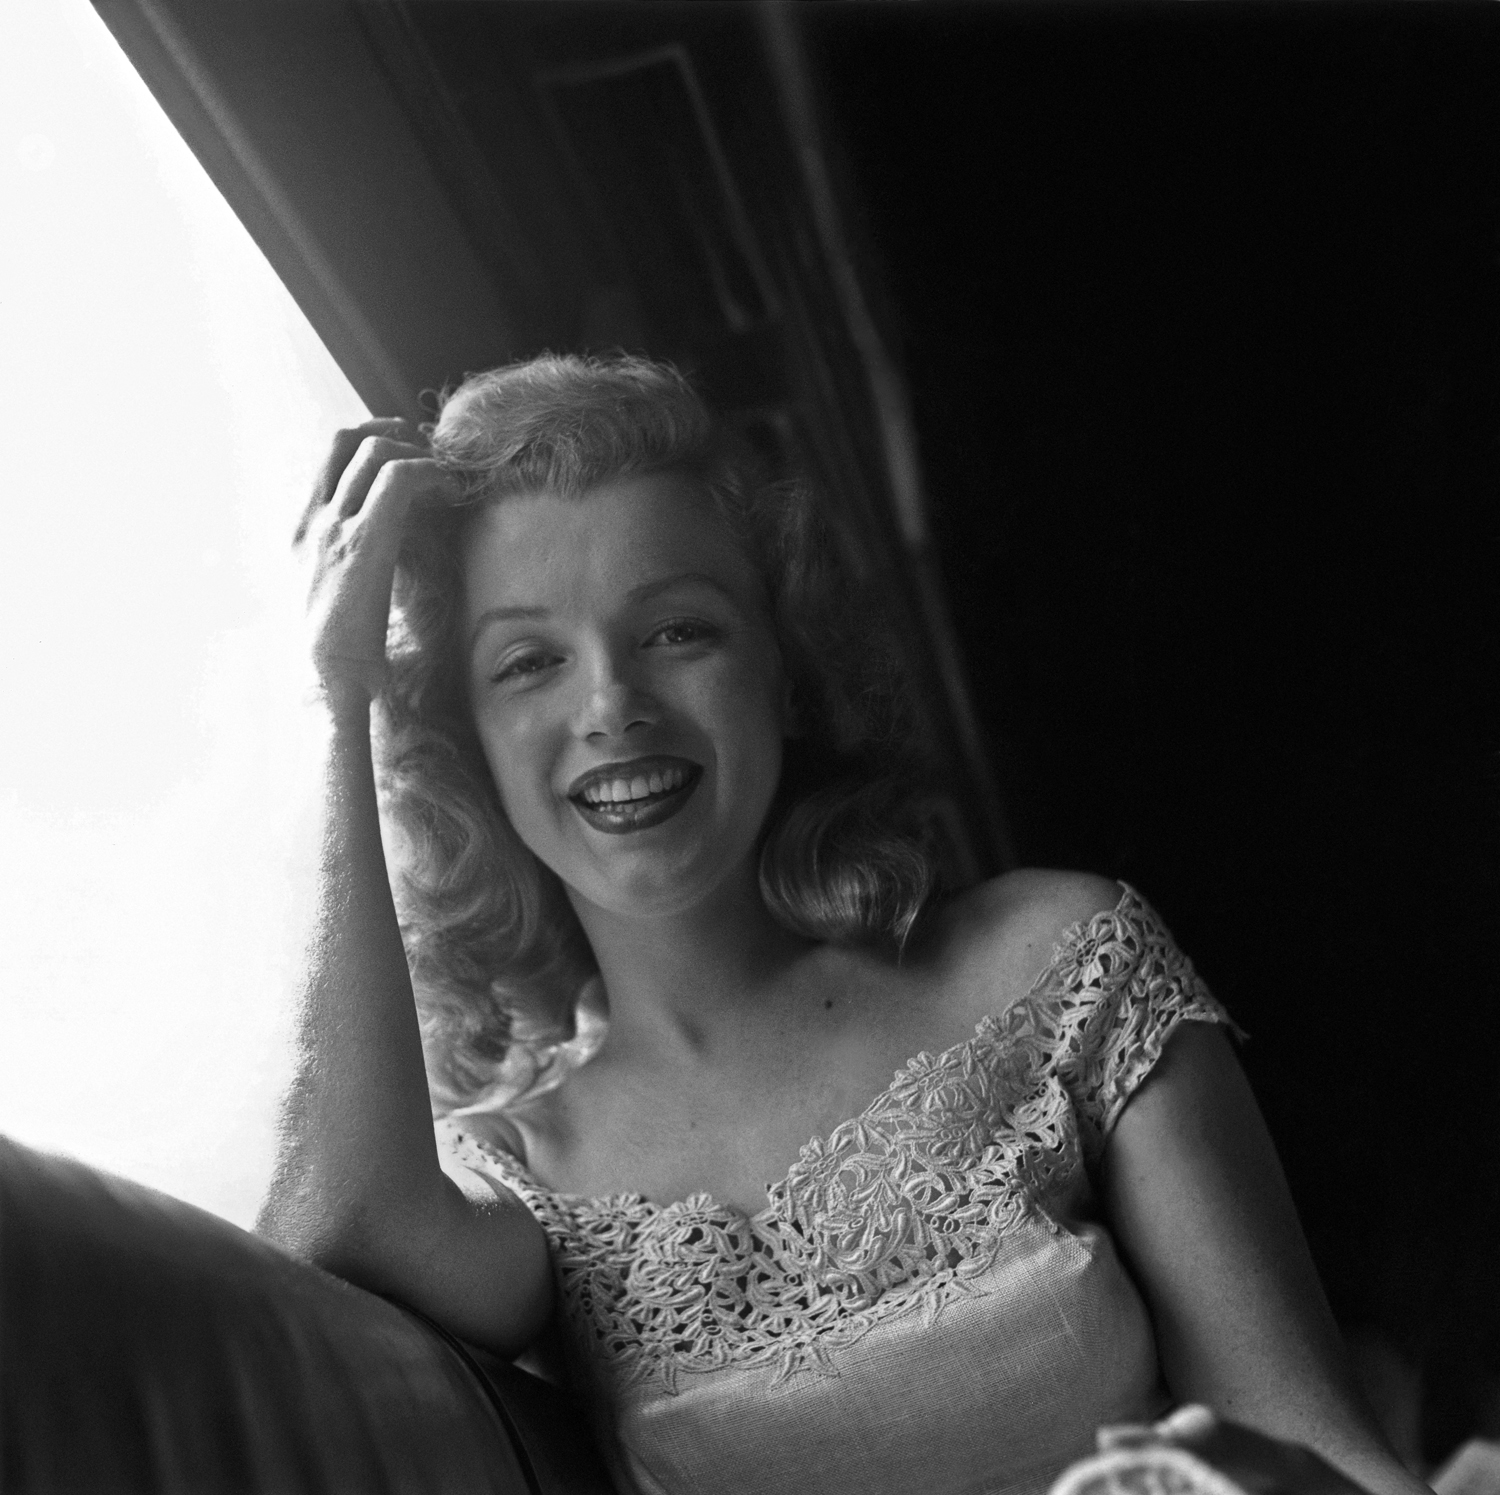 American actress Marilyn Monroe (1926 - 1962) riding on a train from New York City to Warrensburg, New York in June 1949.